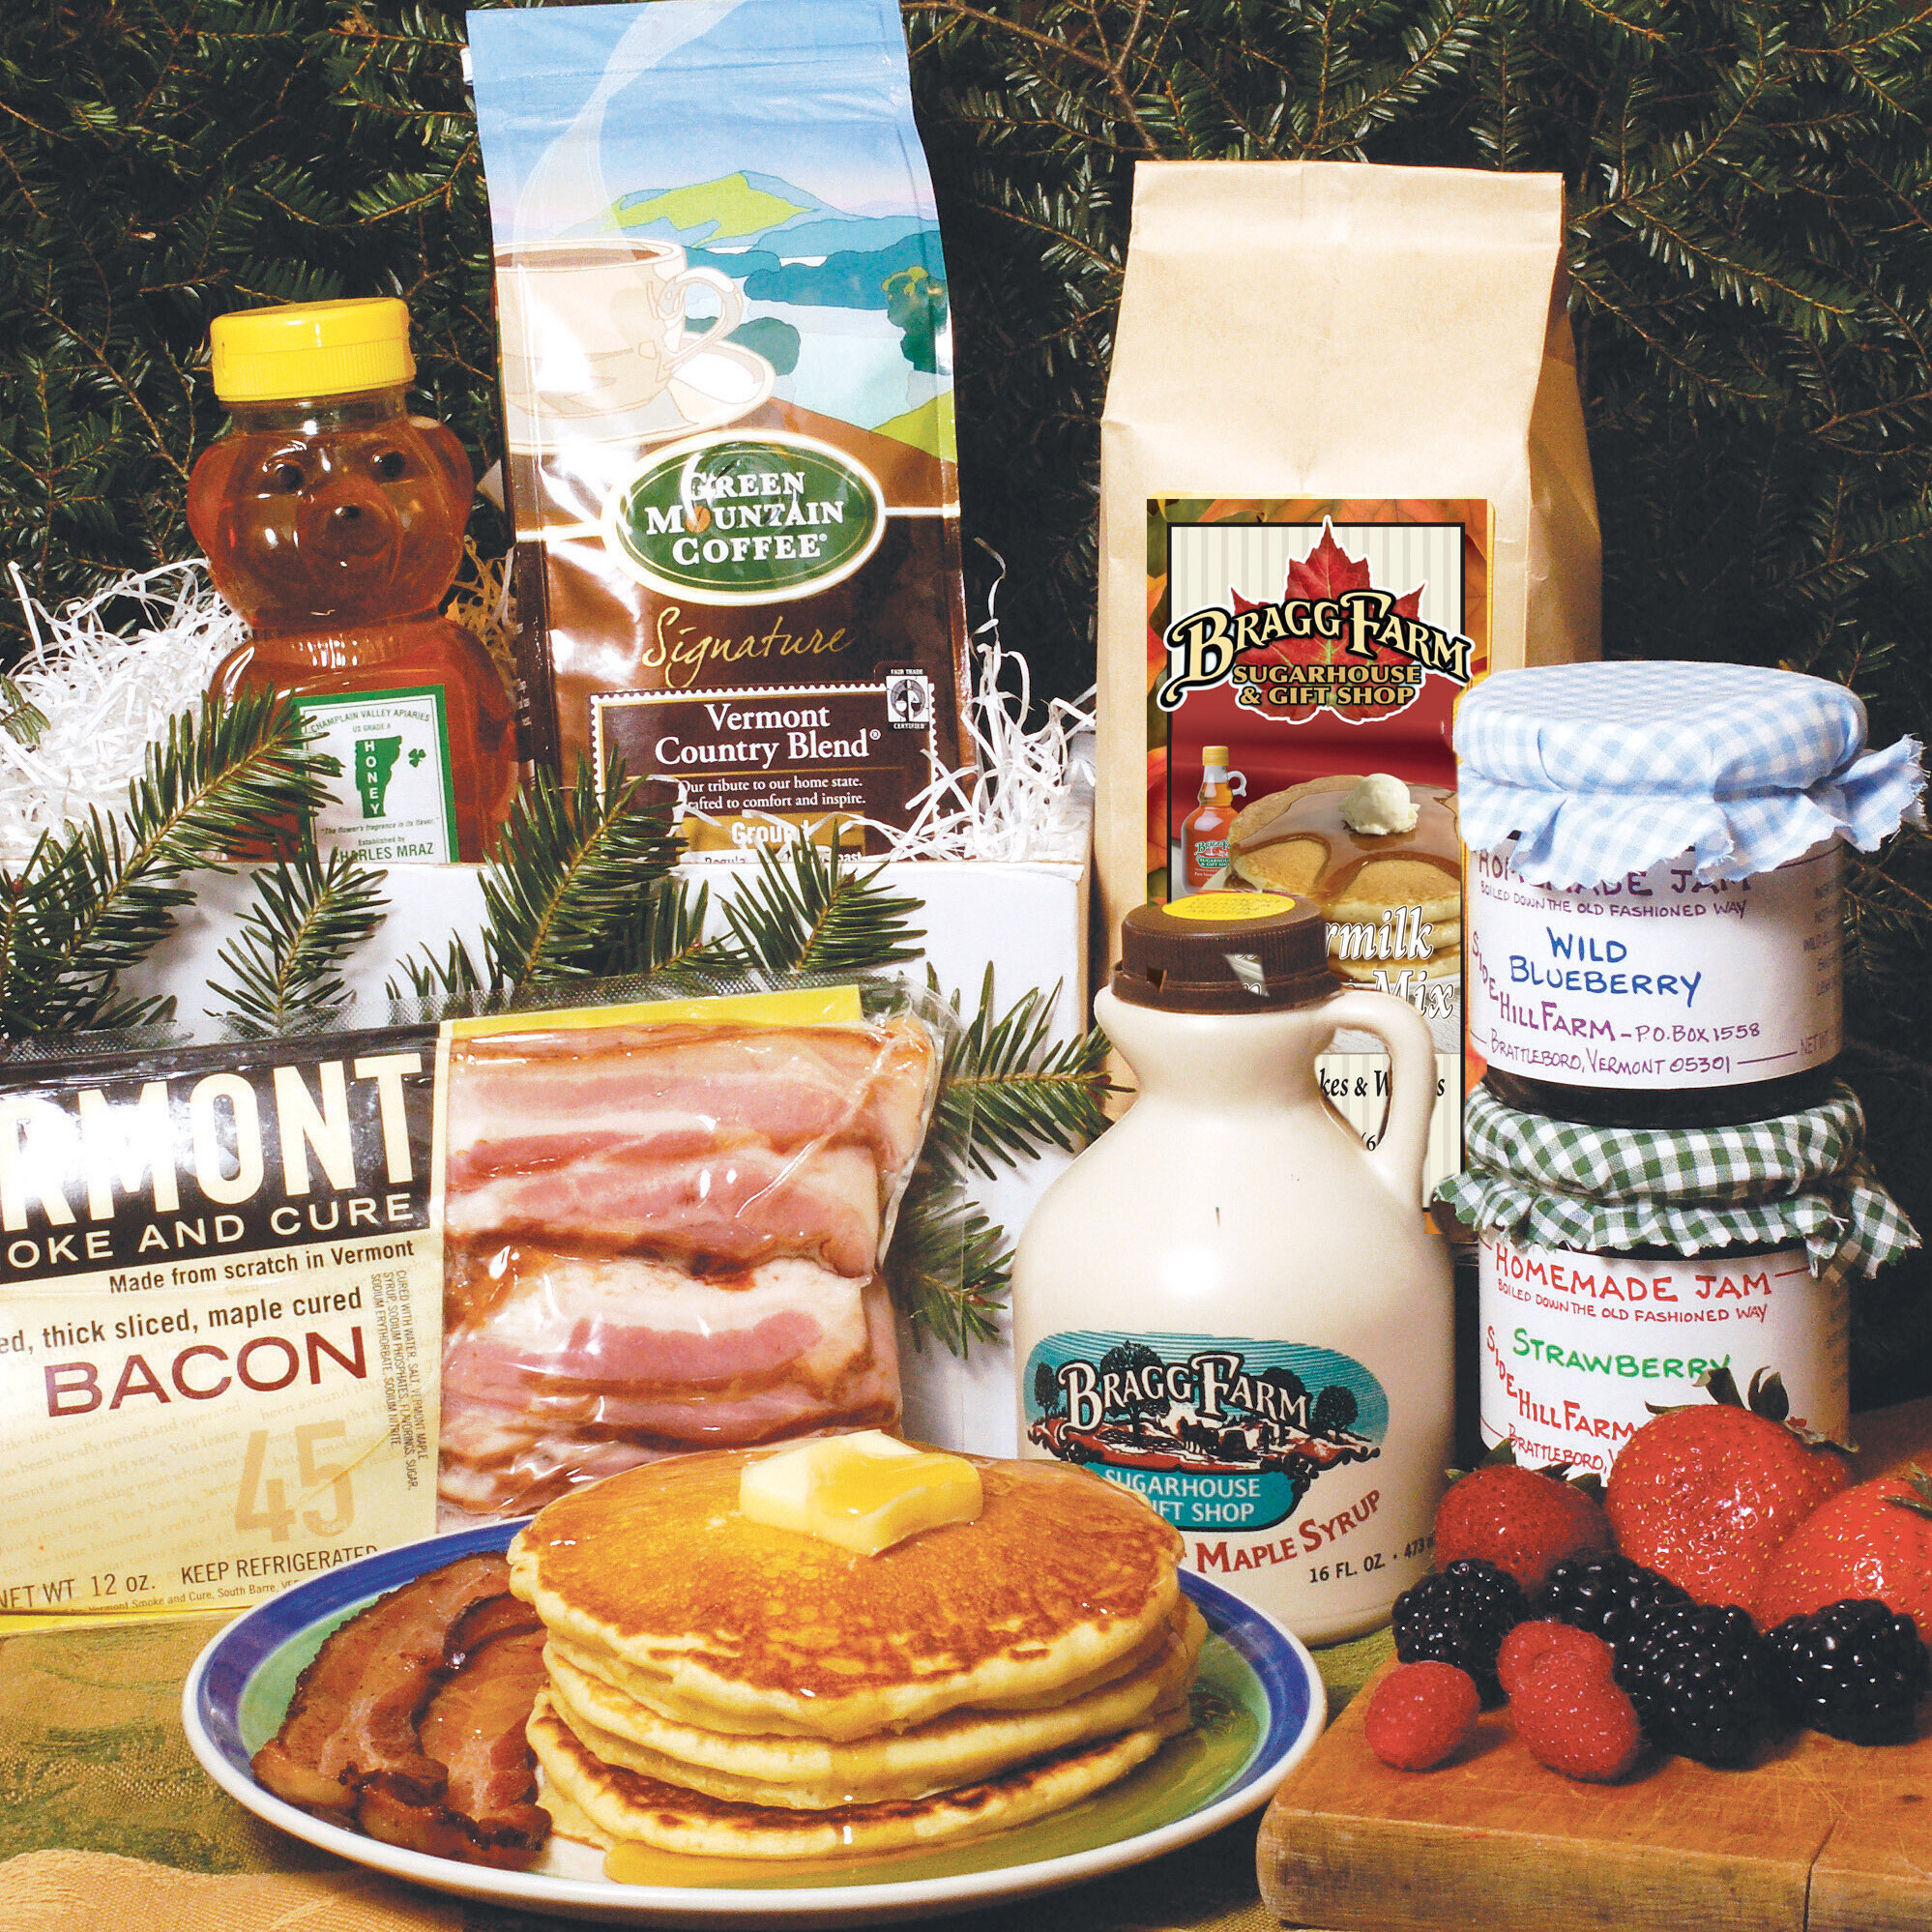 Breakfast Lovers Farm to Table Gourmet Sample Gift Box, Wisconsin Maple  Syrup, Food Gifts Natural Preserves, Locally Grown, Foodie Gift –  Cottonwood Farm Store, Farm to Table Goods & Custom Made Art